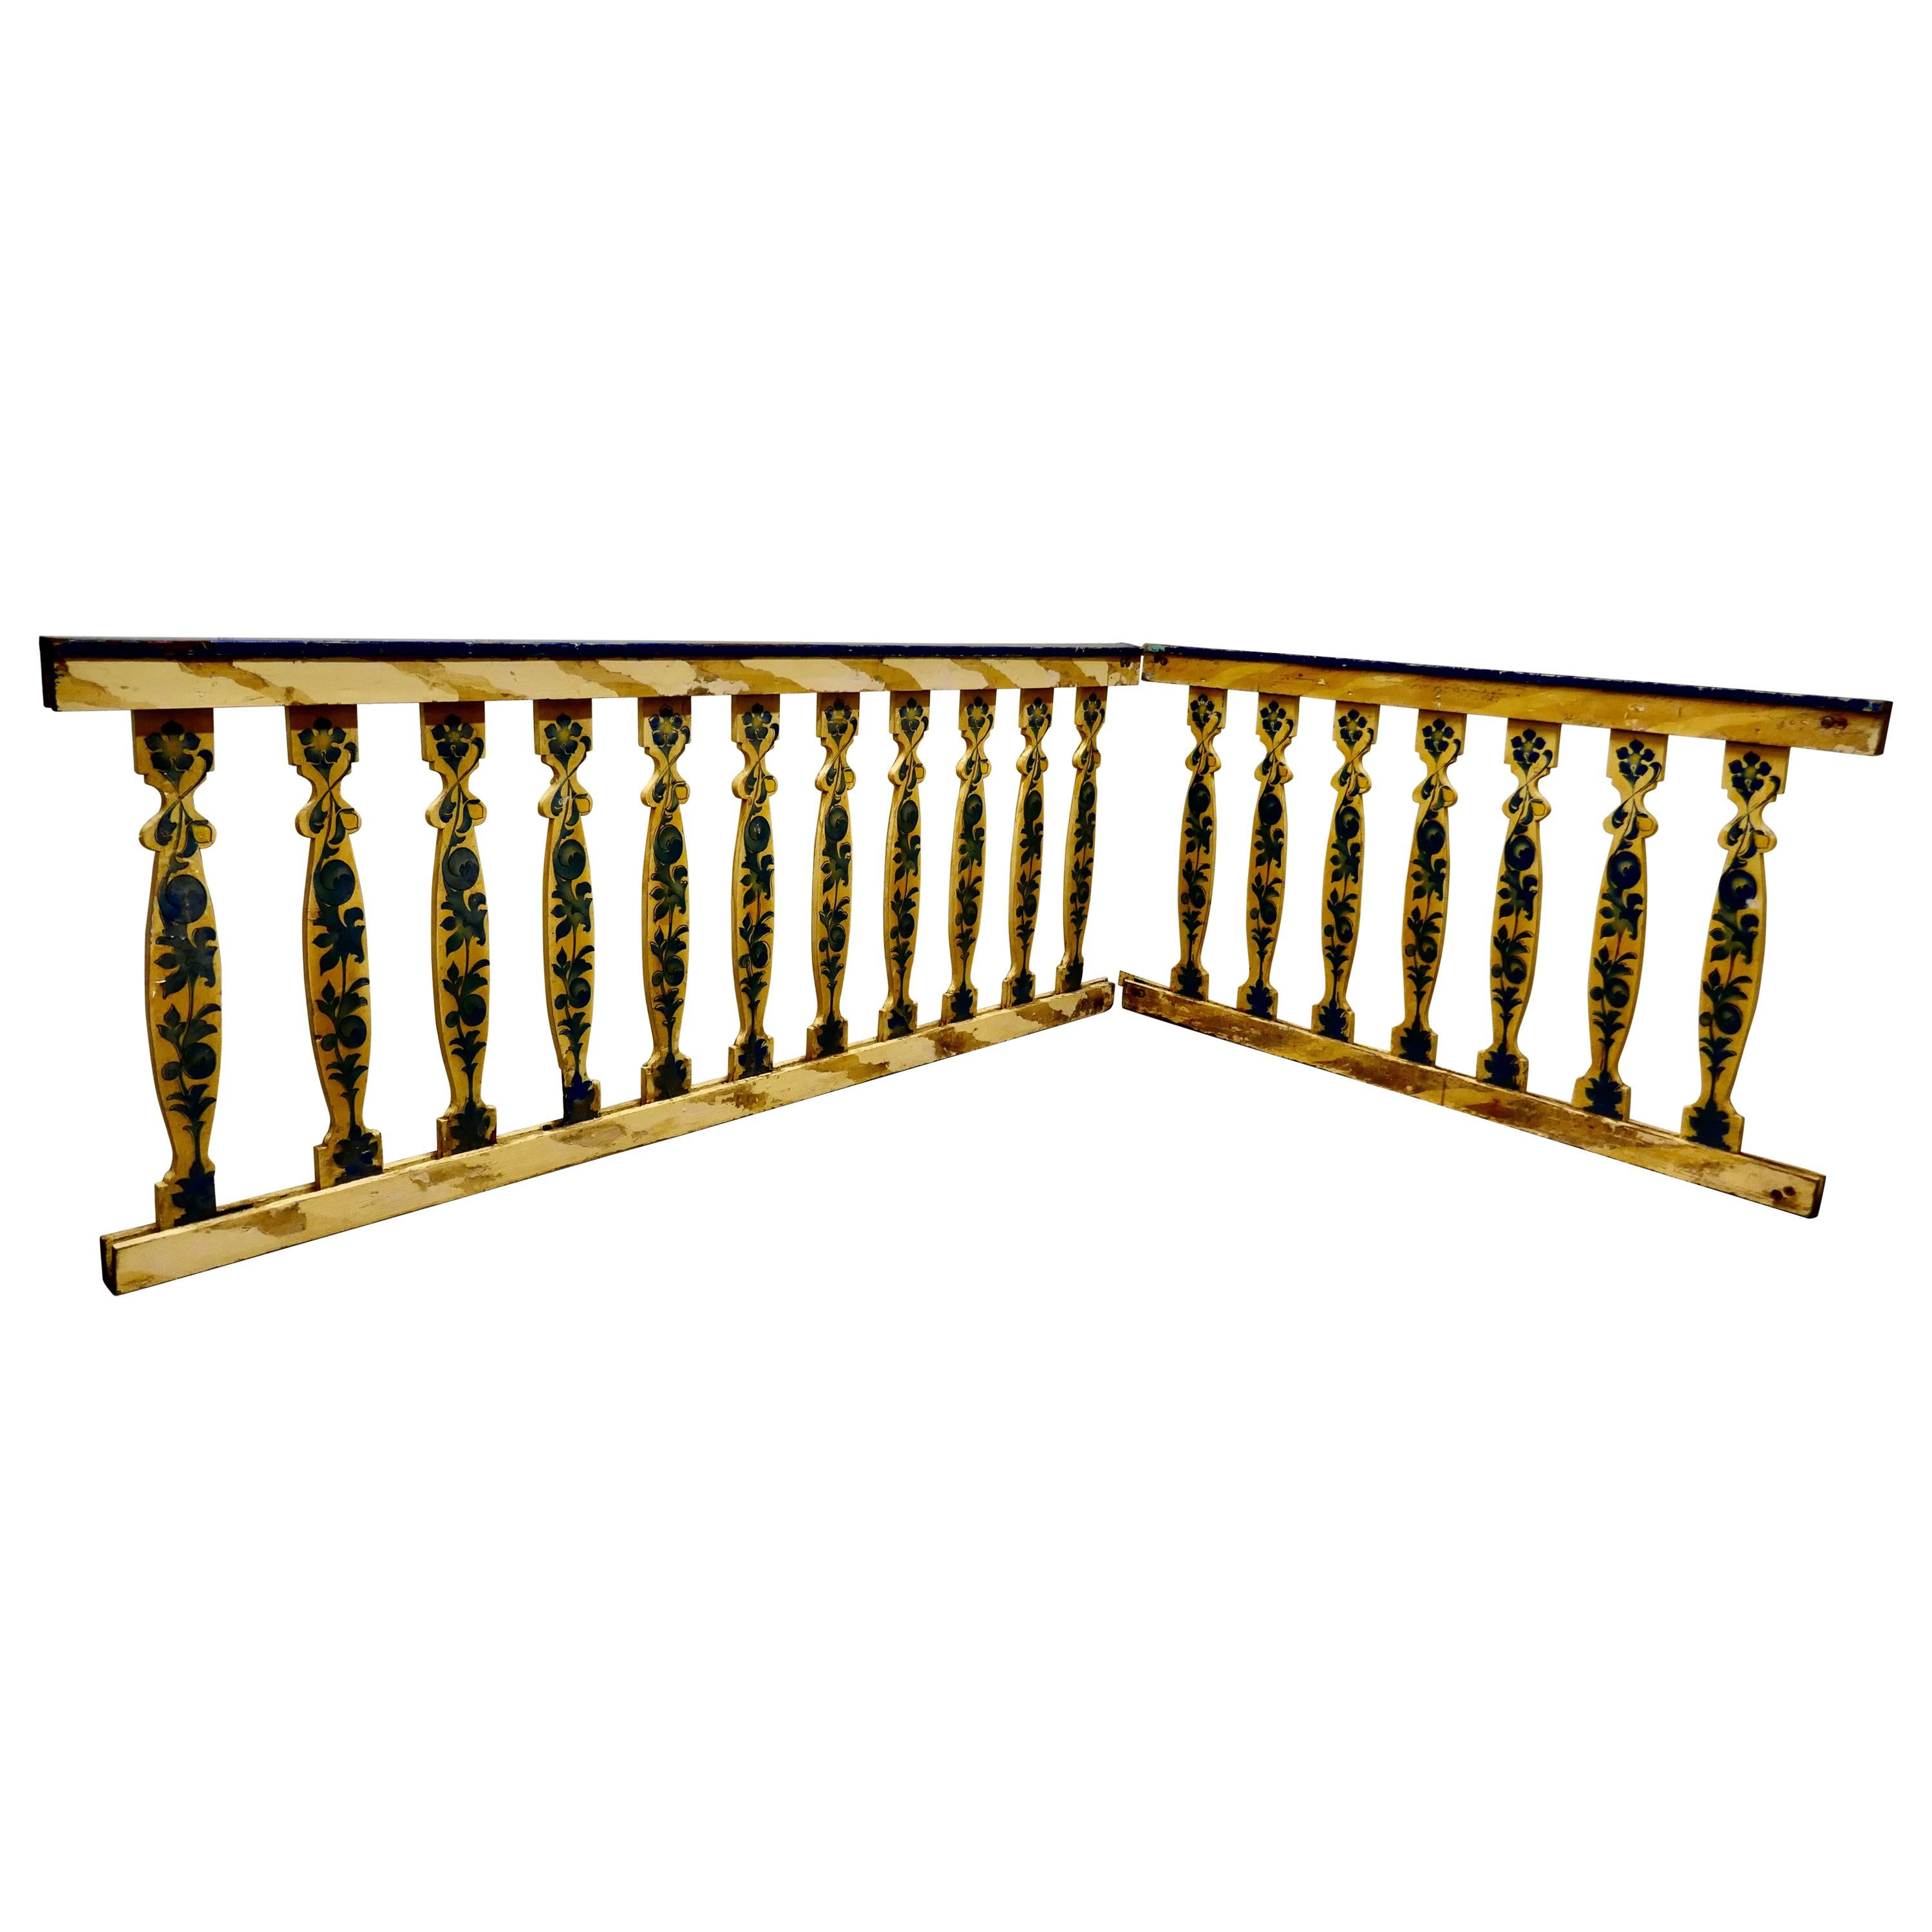 Hand Painted Wooden Railings from a Fair Ground